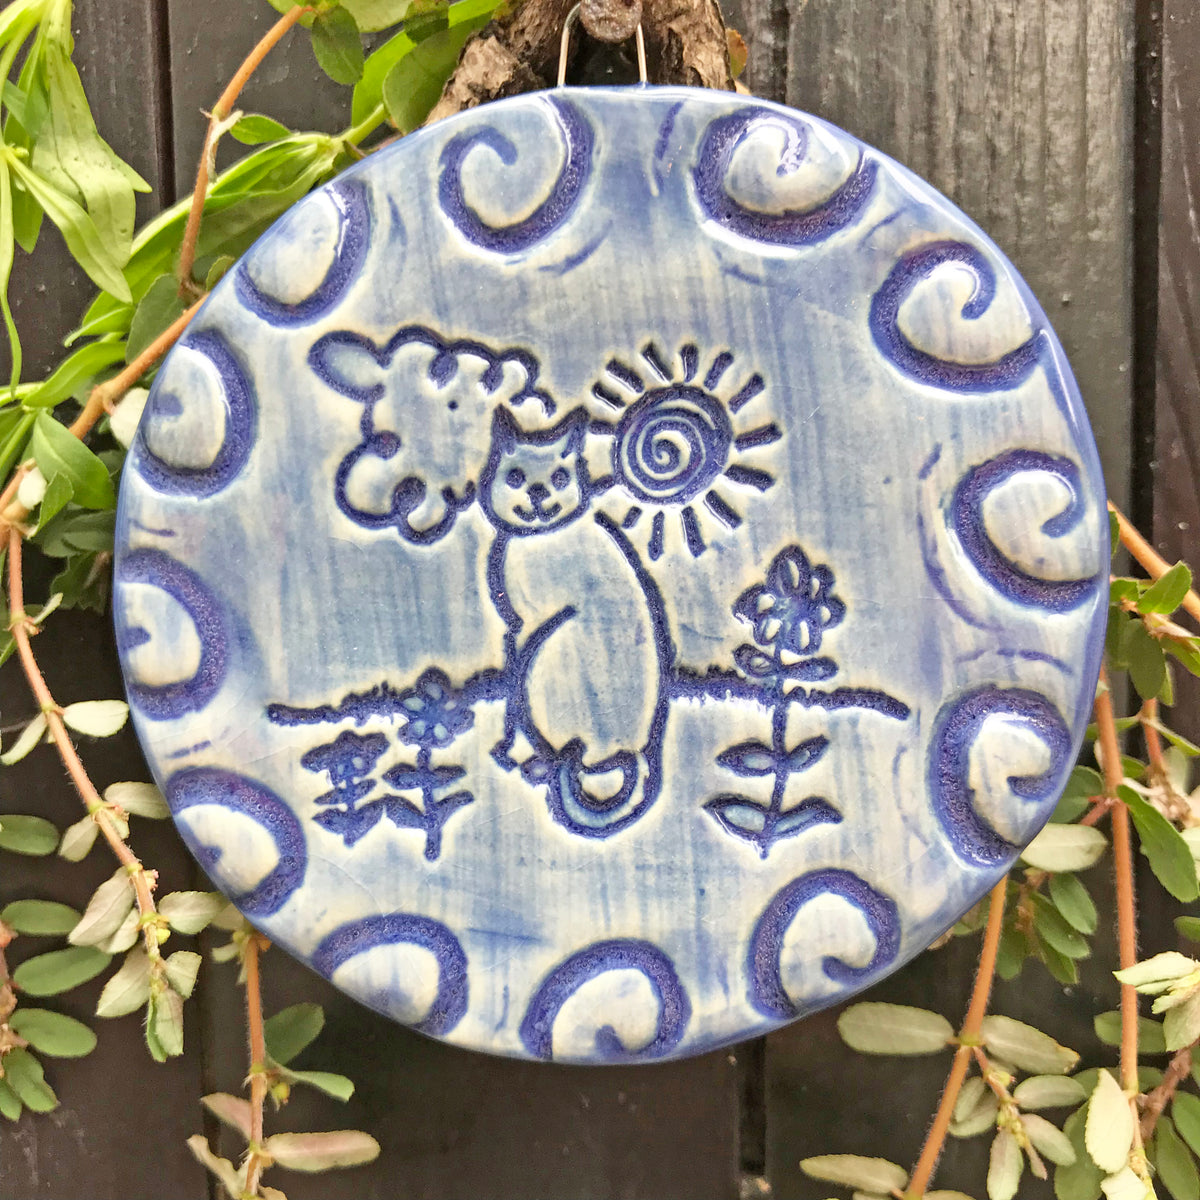 Handmade cat ornament glazed in dark blue.  The design is called &quot;Cat in the Sun&quot; and it is an original by Lorraine Oerth.